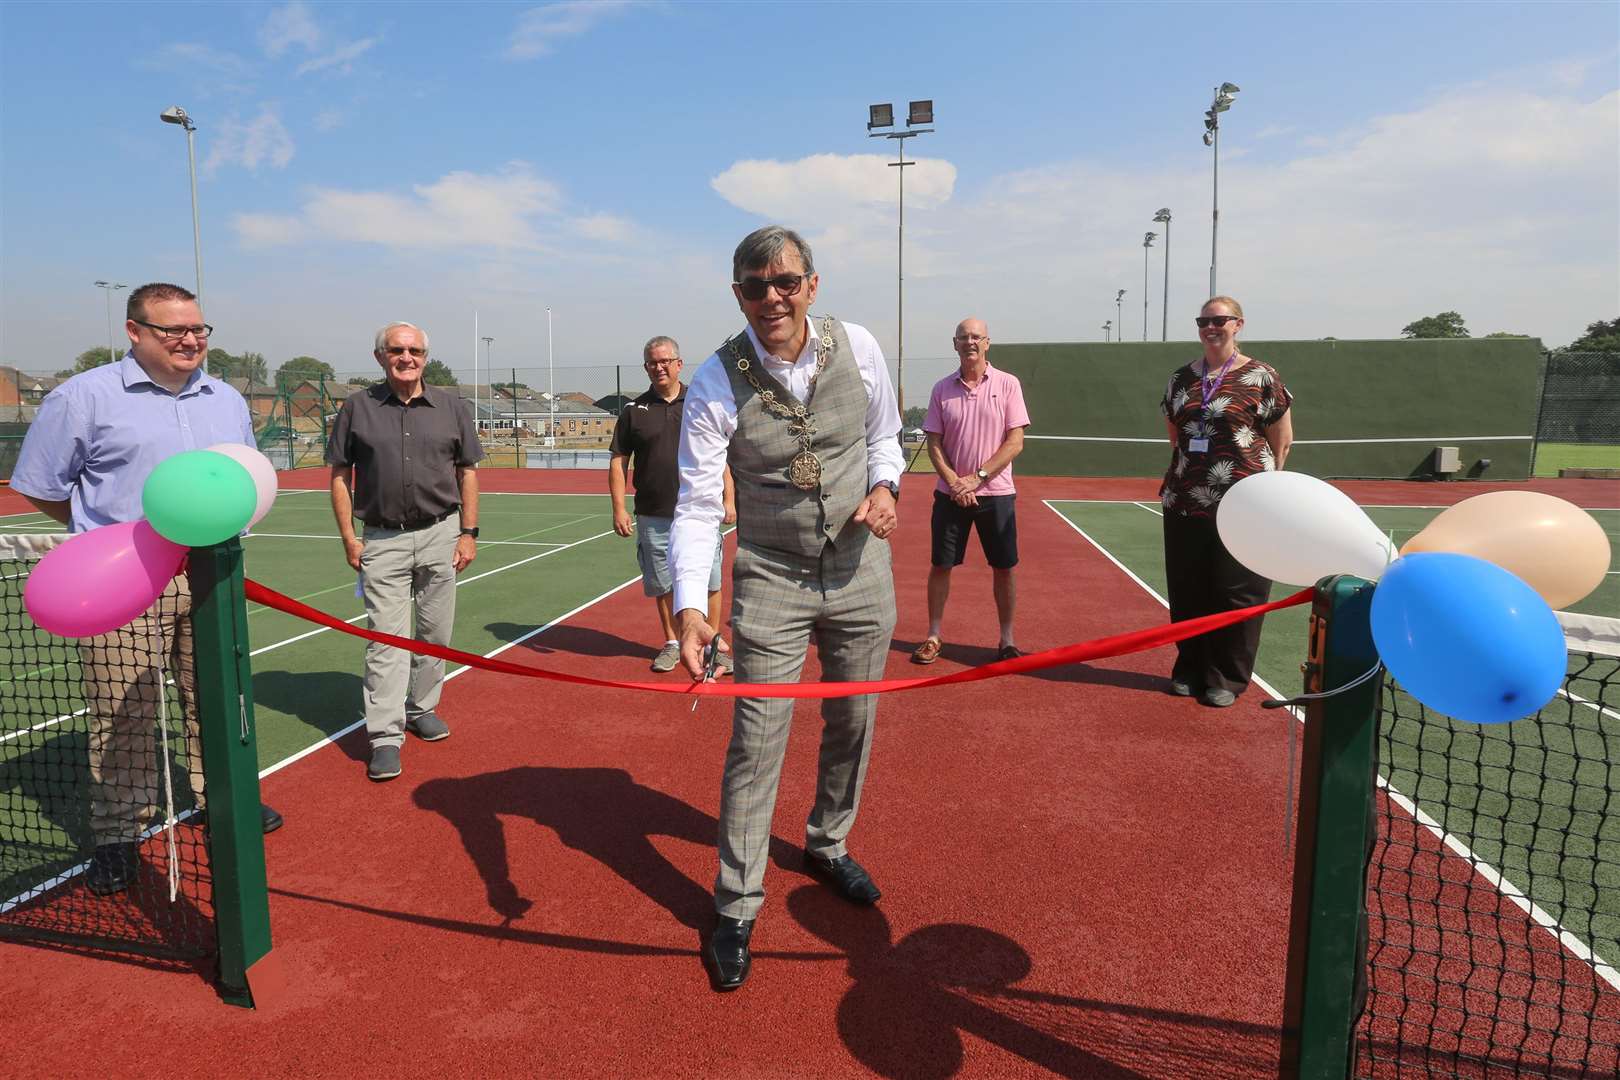 Gravesham mayor John Caller opened the new courts at Gravesham Tennis Club in August. Picture: Rob Powell